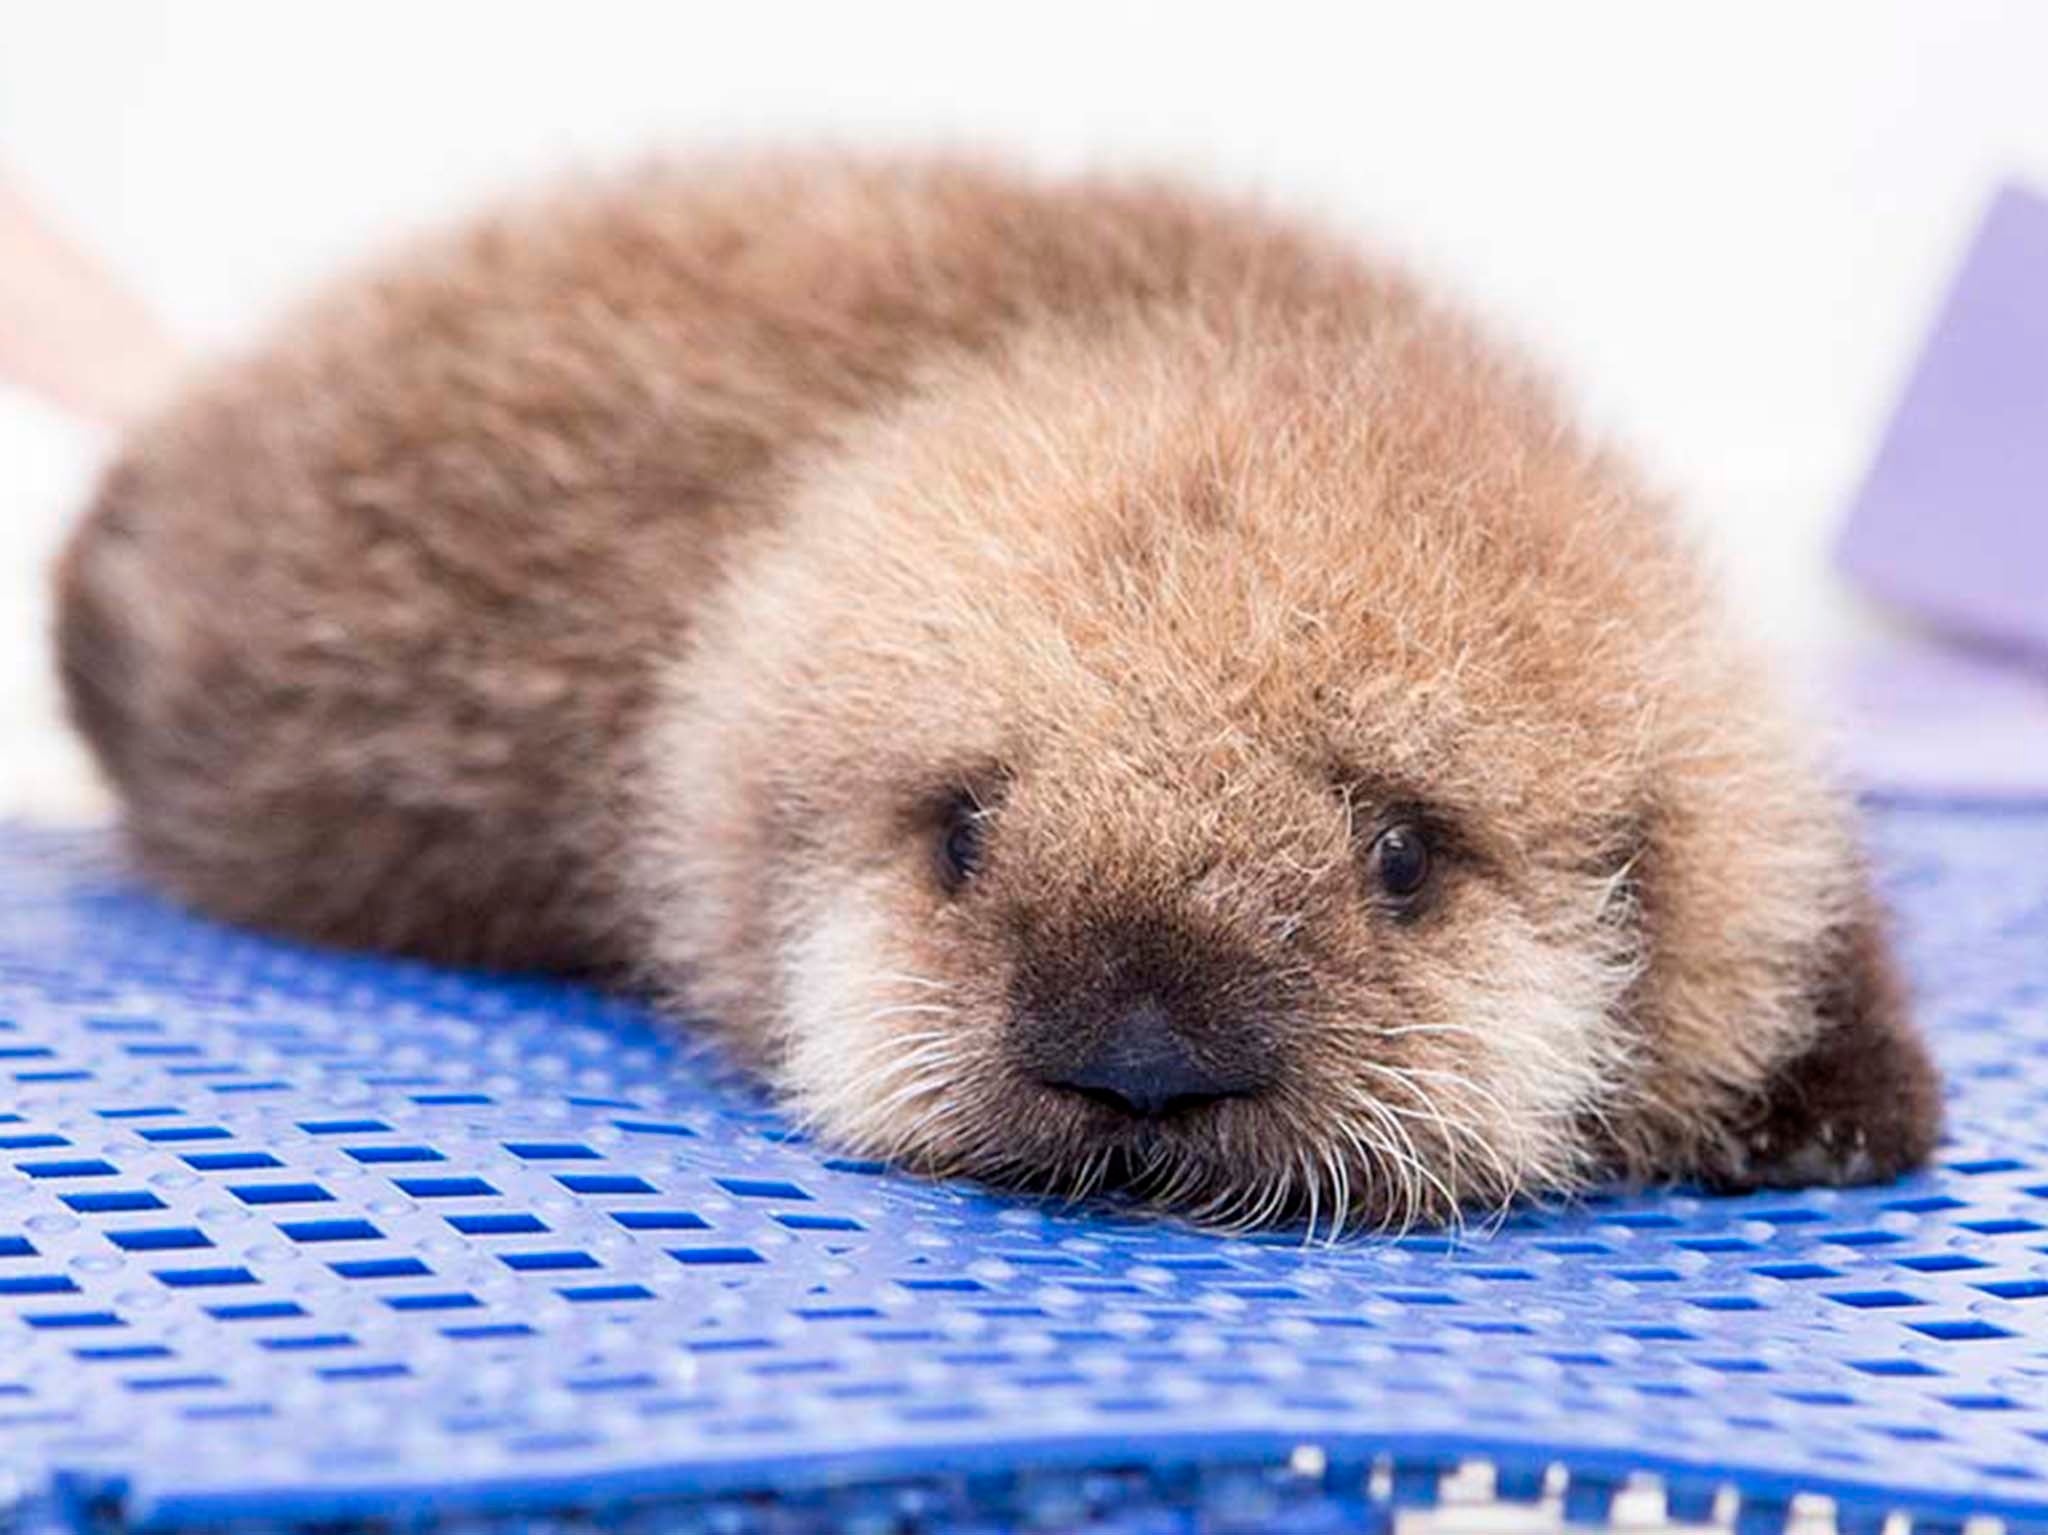 Meet Pup 681, the orphaned southern sea otter in Chicago.